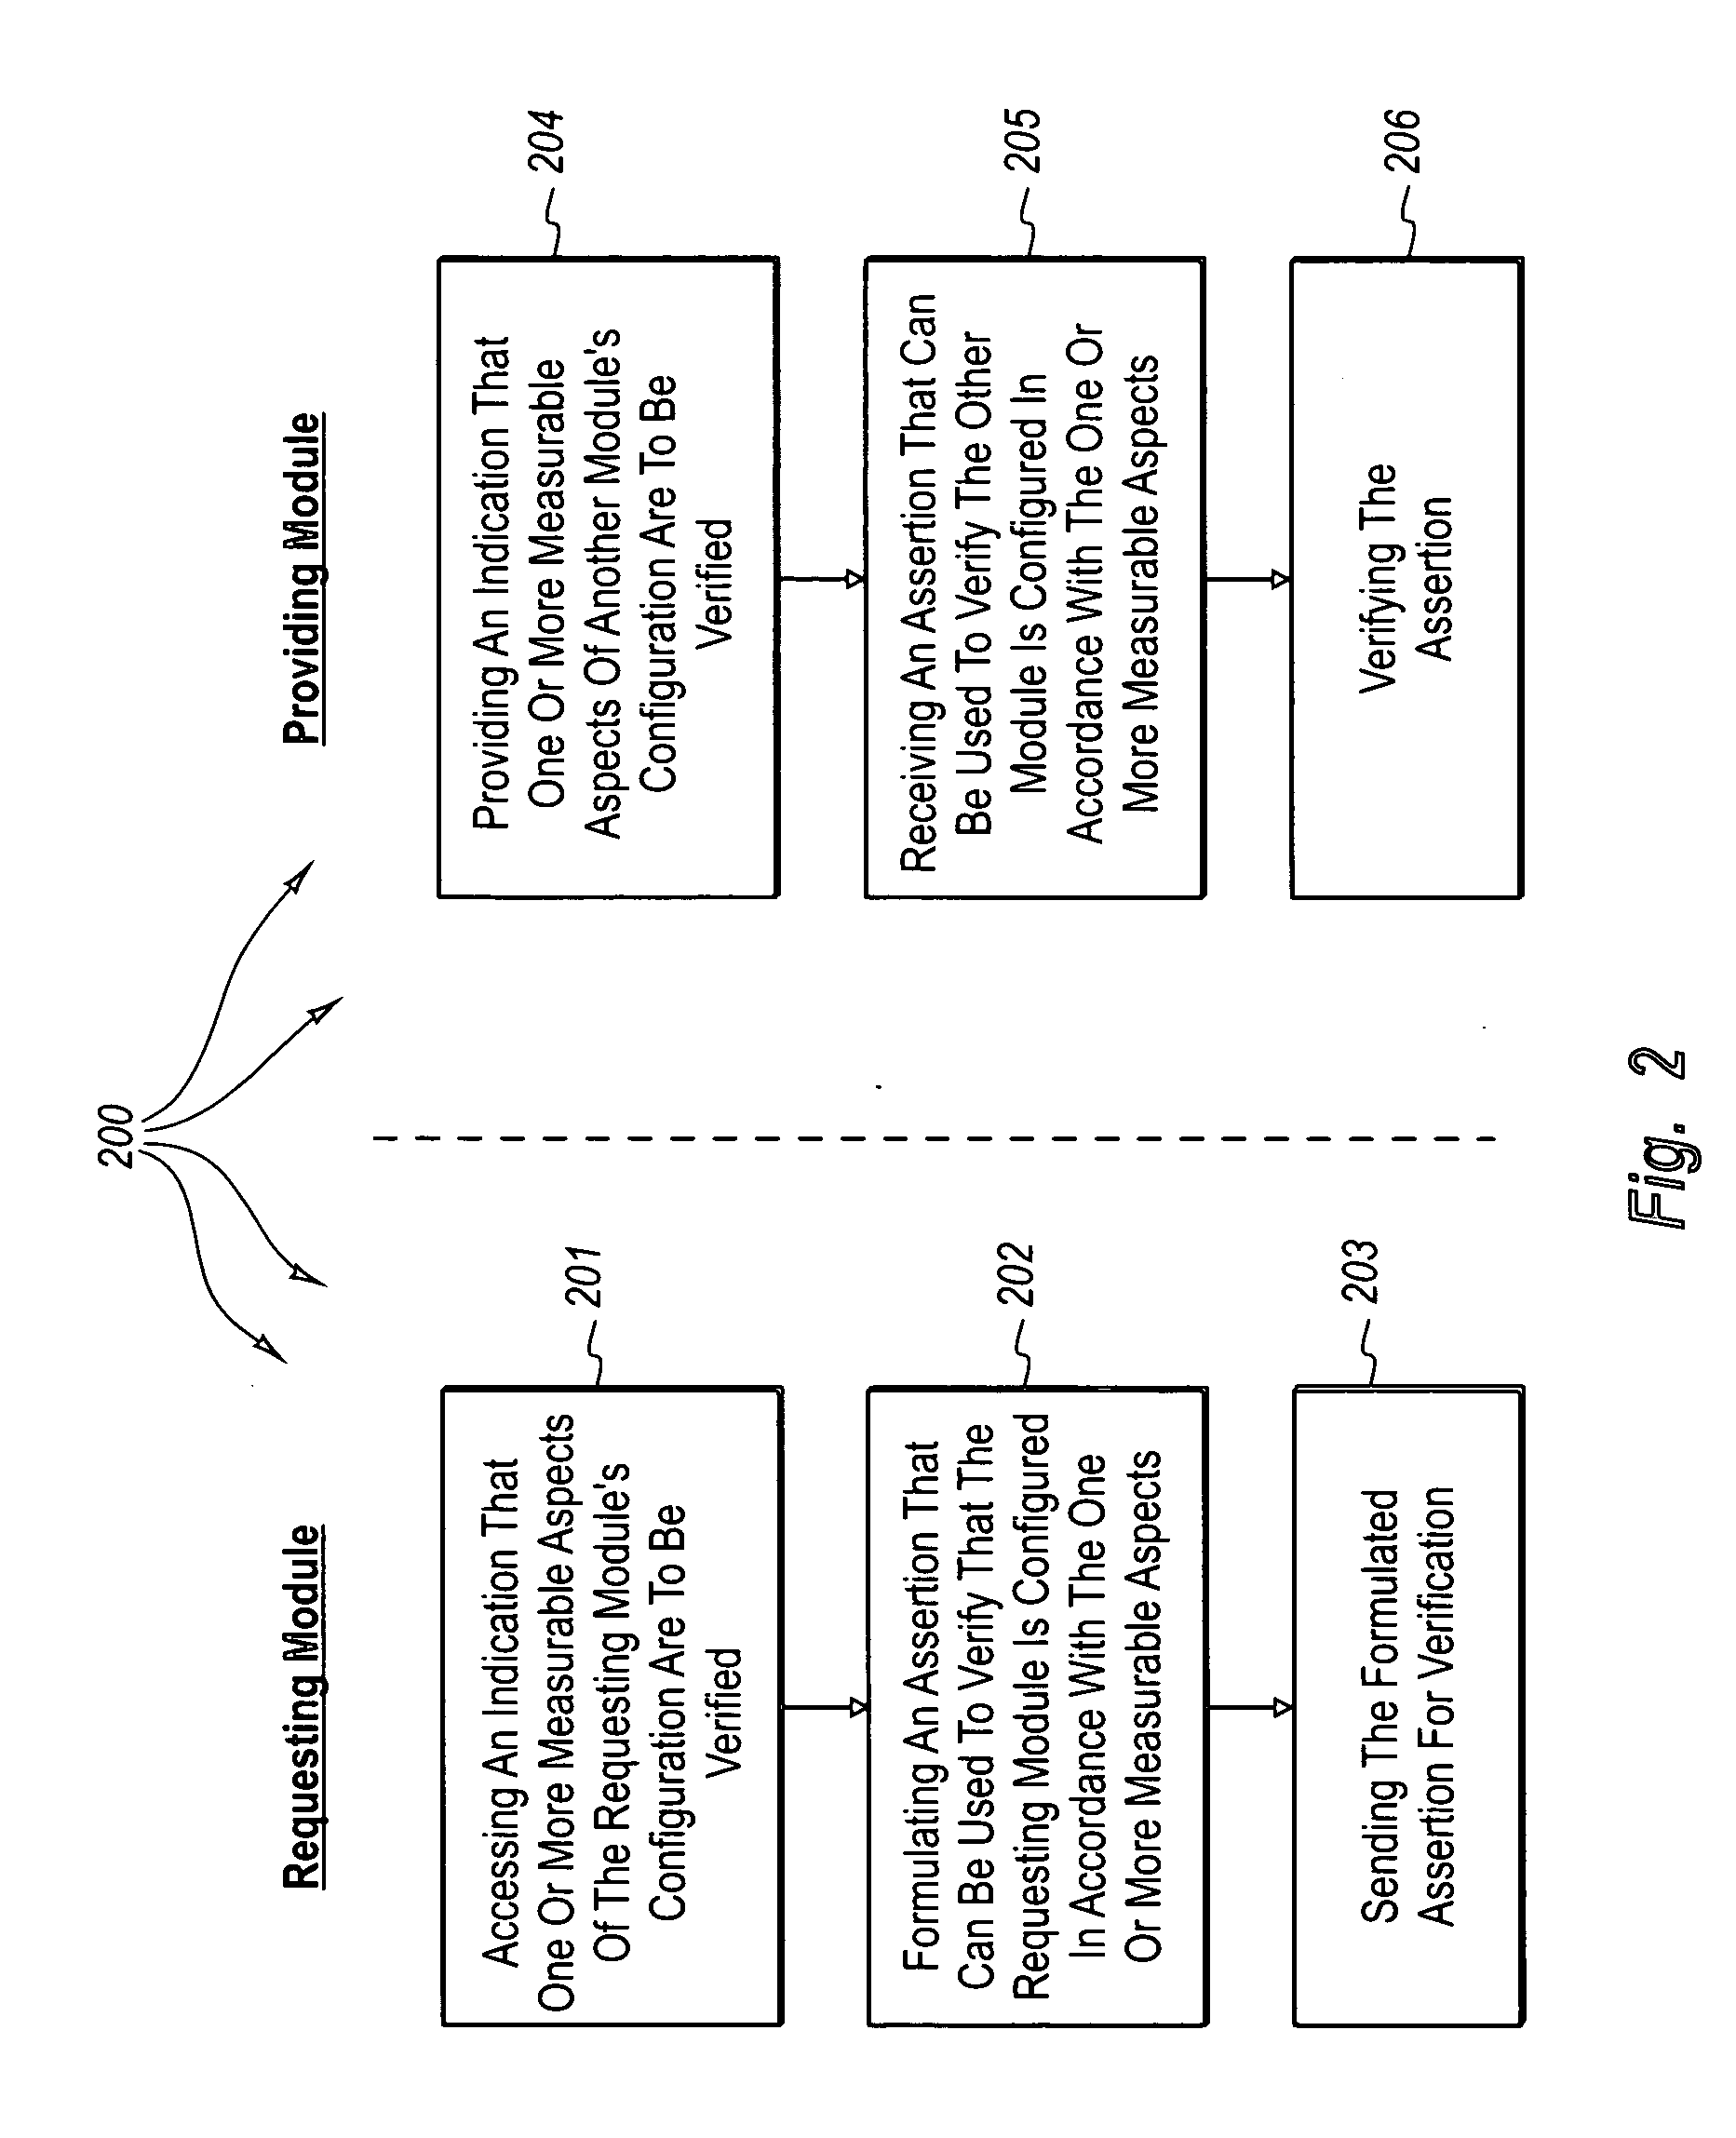 Bi-directionally verifying measurable aspects associated with modules, pre-computing solutions to configuration challenges, and using configuration challenges along with other authentication mechanisms